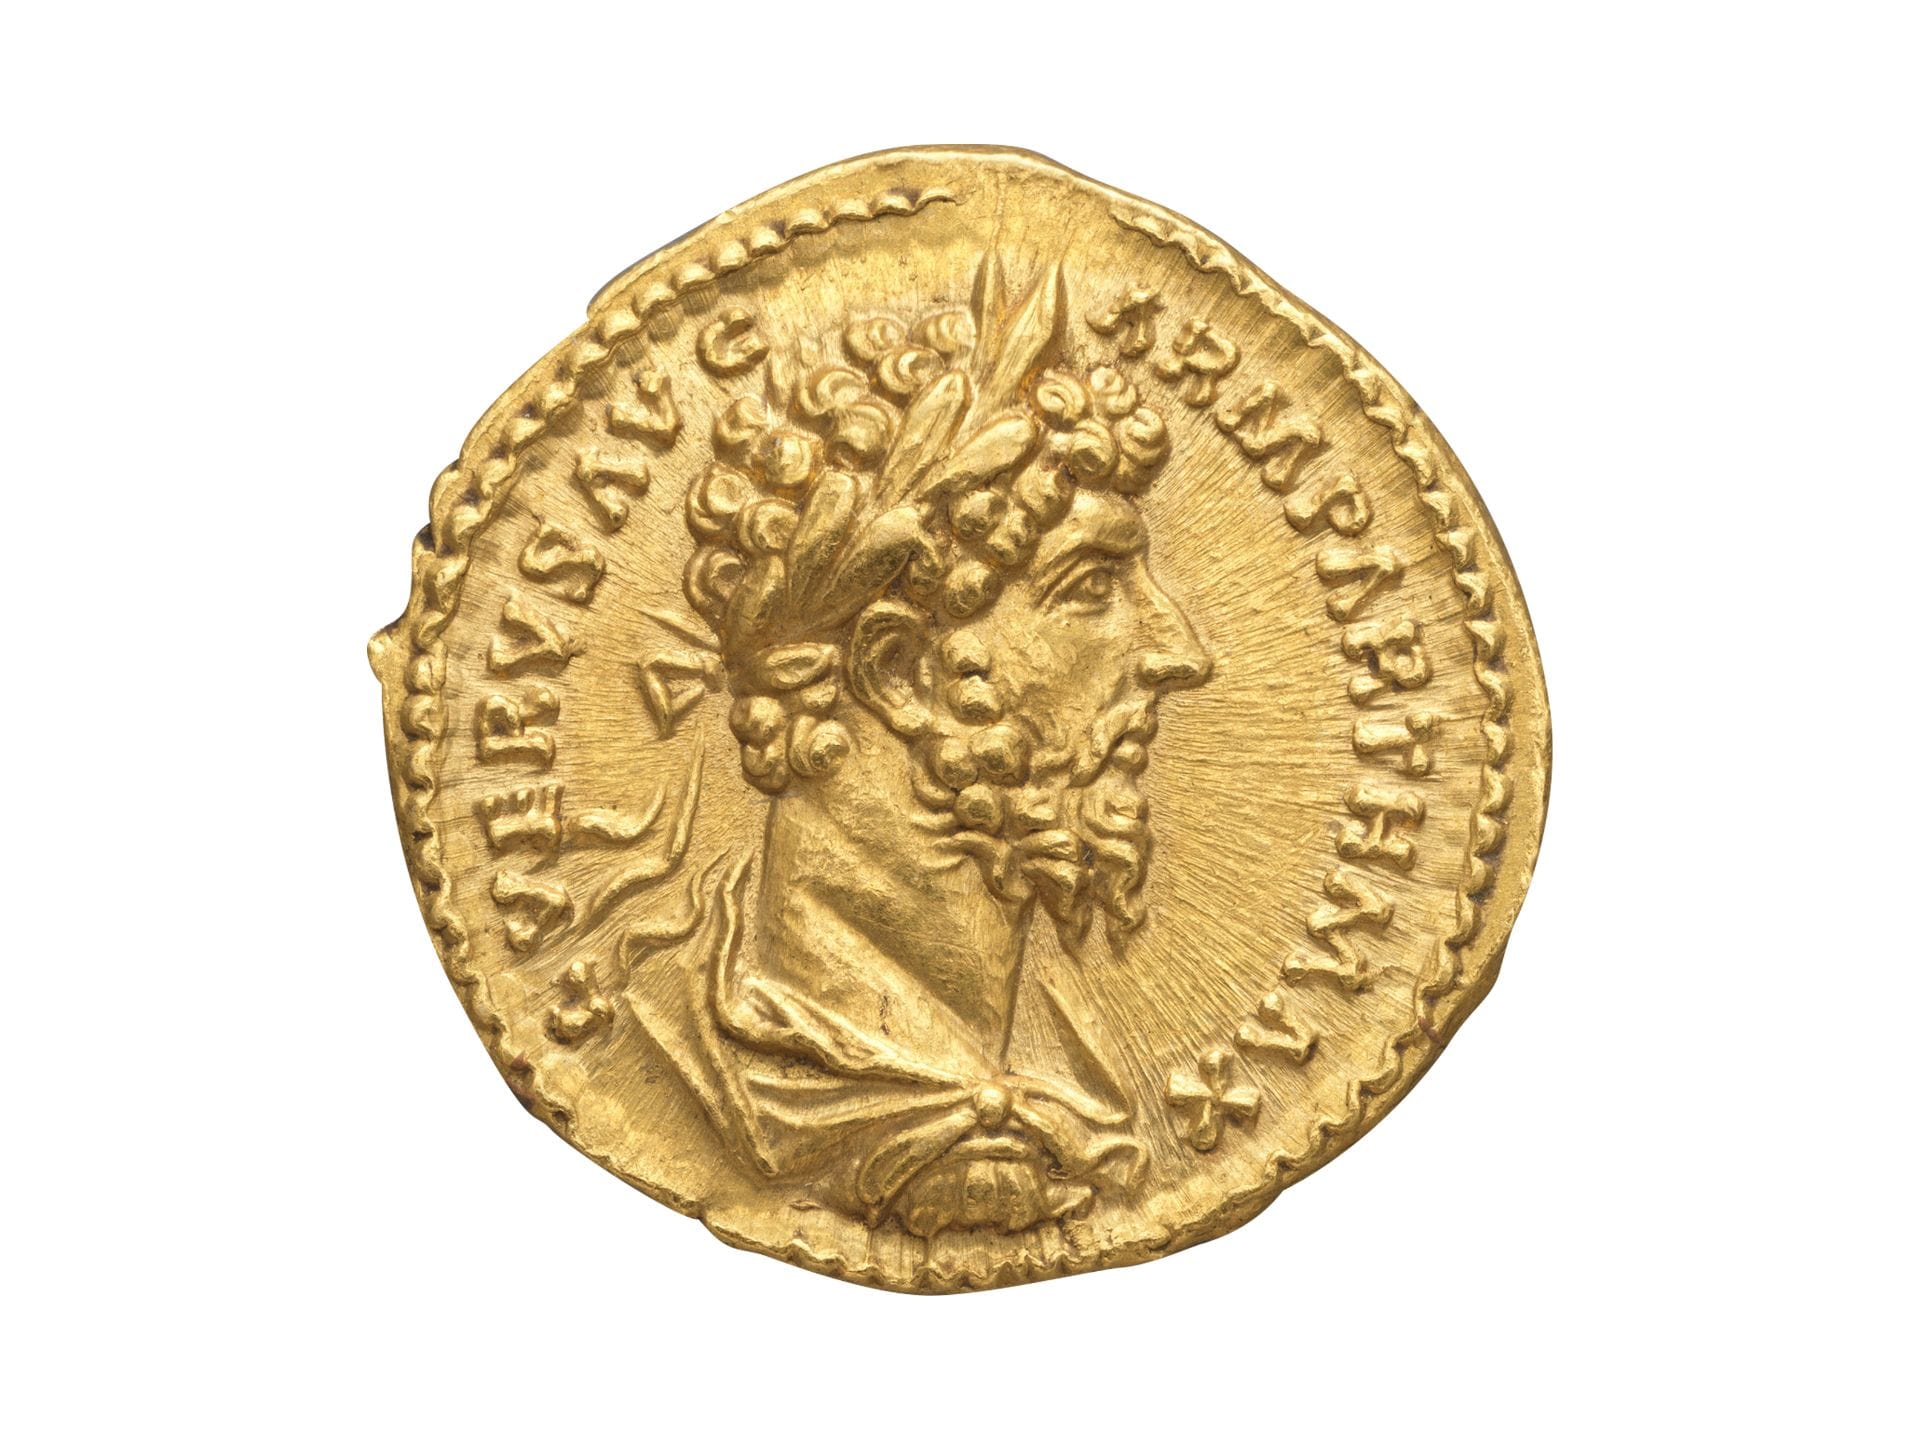 Roman Coins and The Monetary System of the Roman Empire